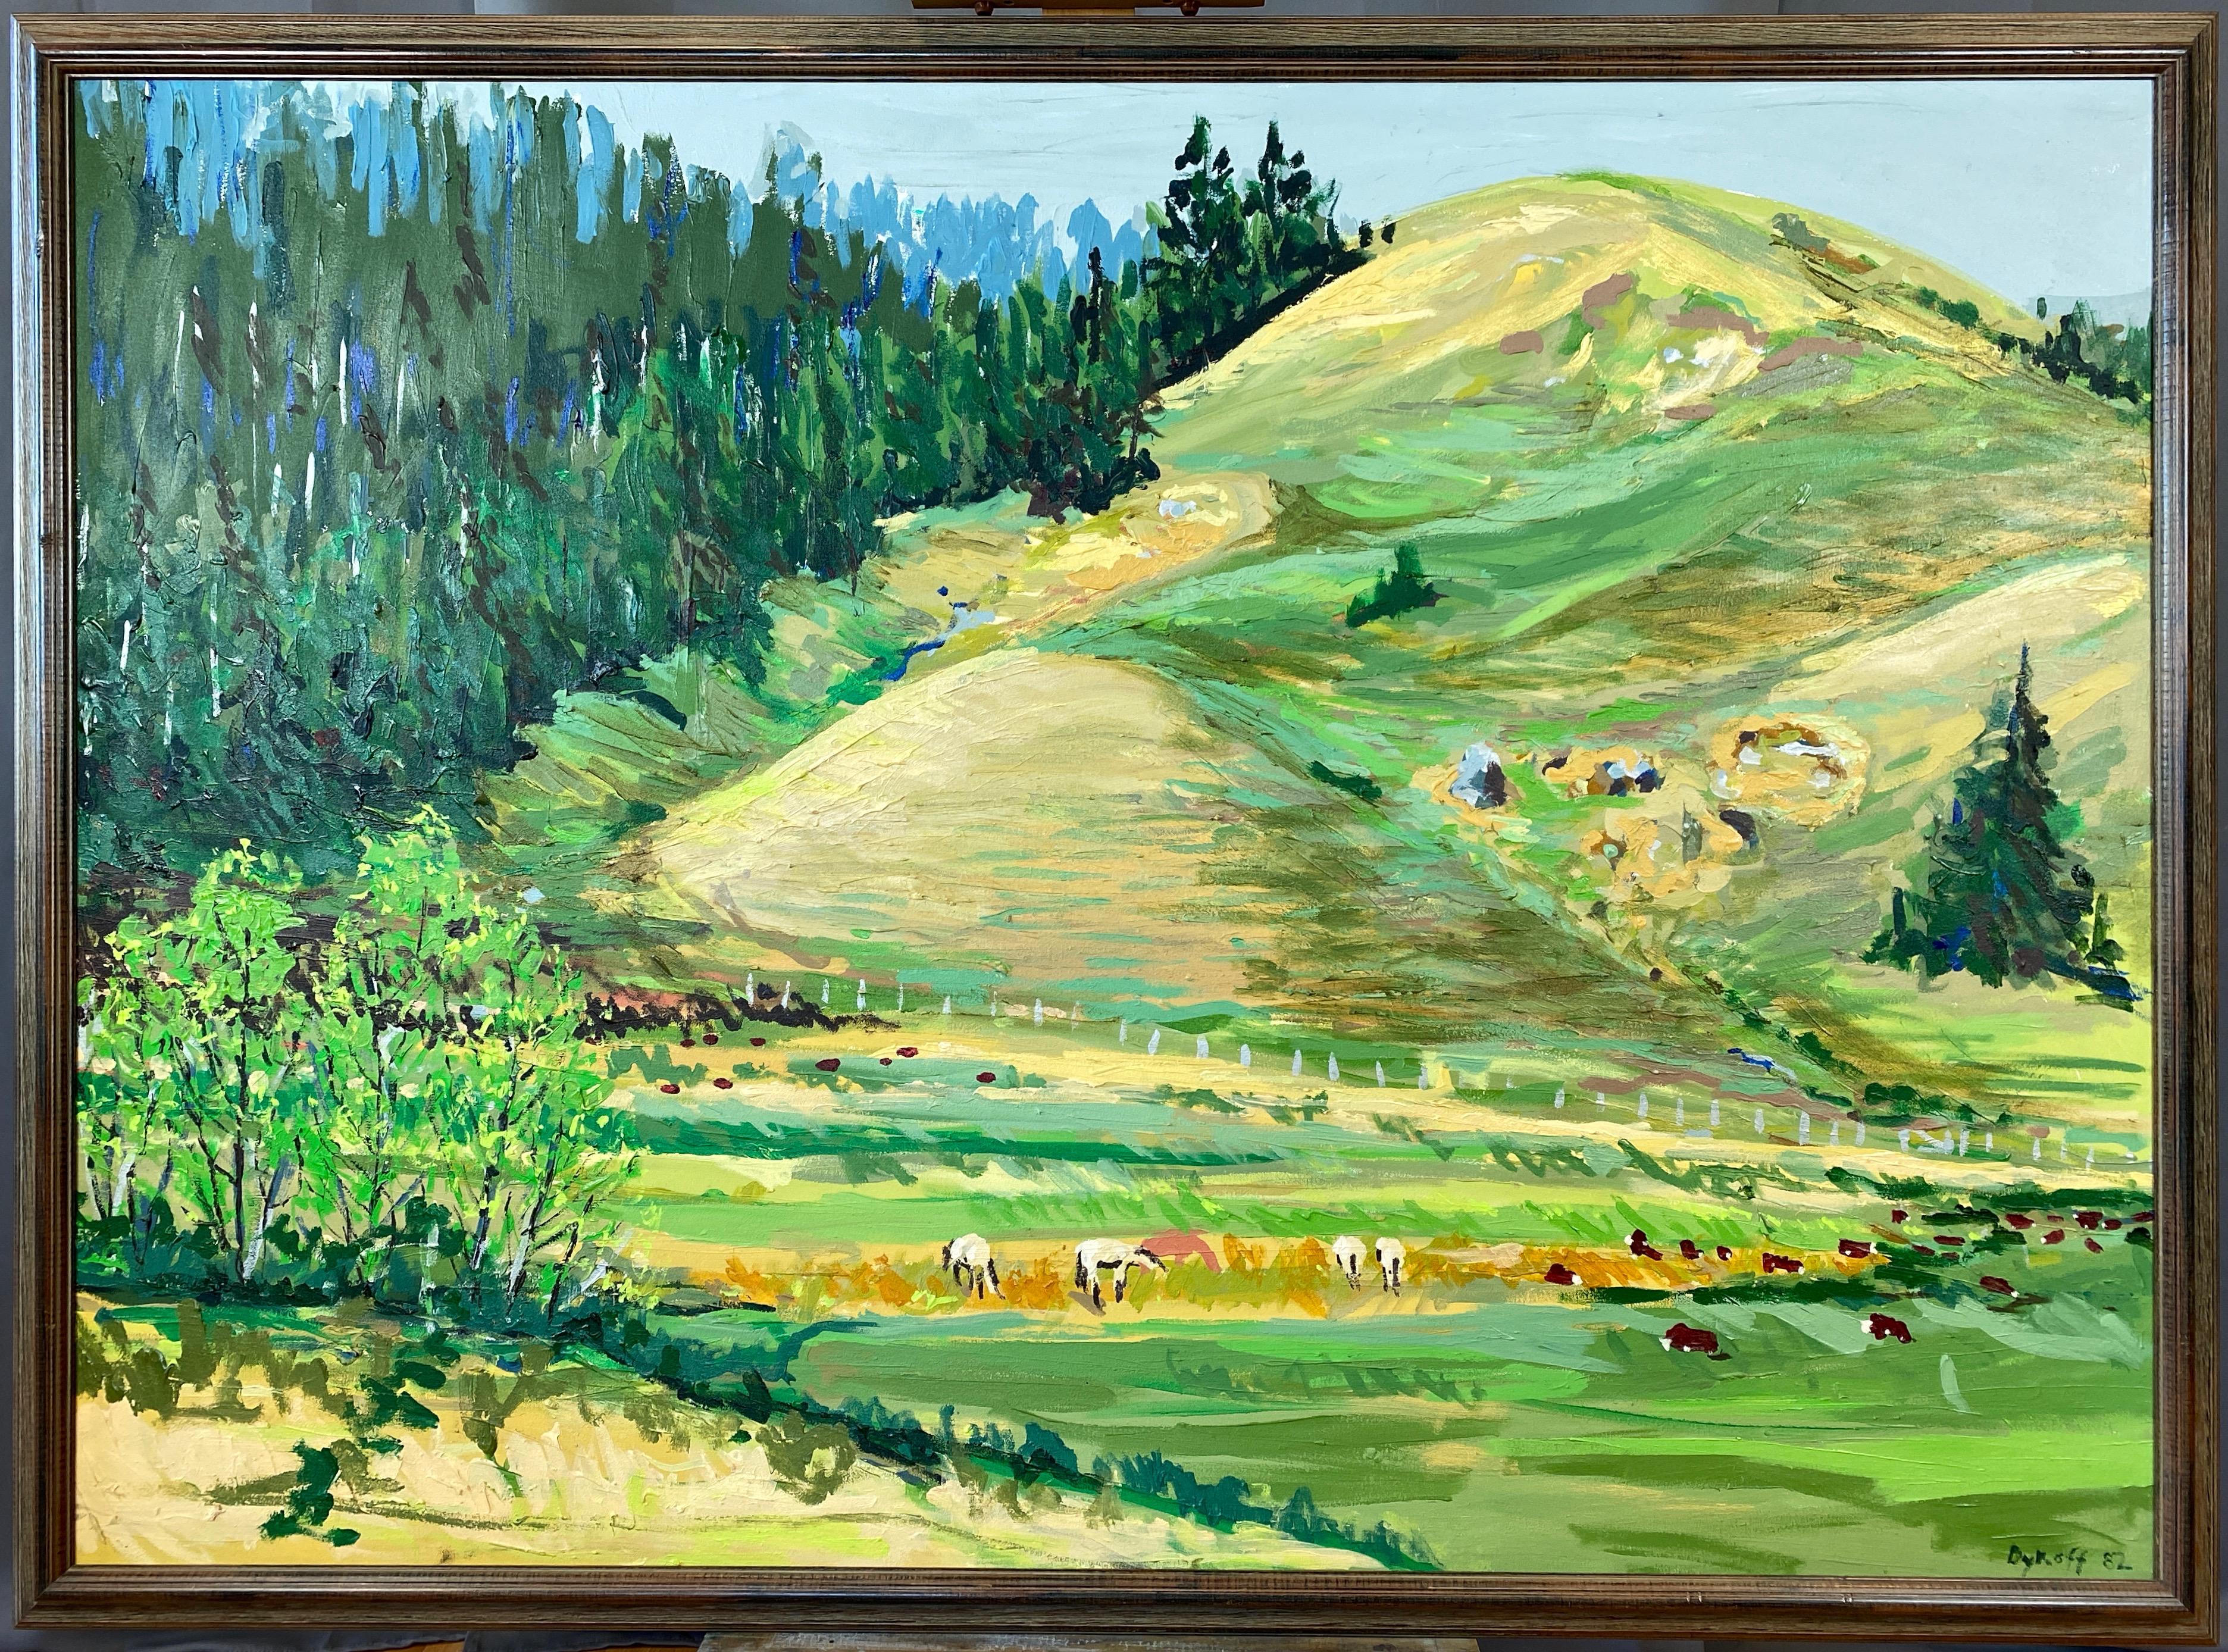 An impressively sized 1982 impressionist oil painting on canvas of a pastoral landscape by Dykoff.

Invitingly bucolic scene depicts a golden hillside and bright green pasture populated by grazing and lazing horses and cows bordered by a dense dark